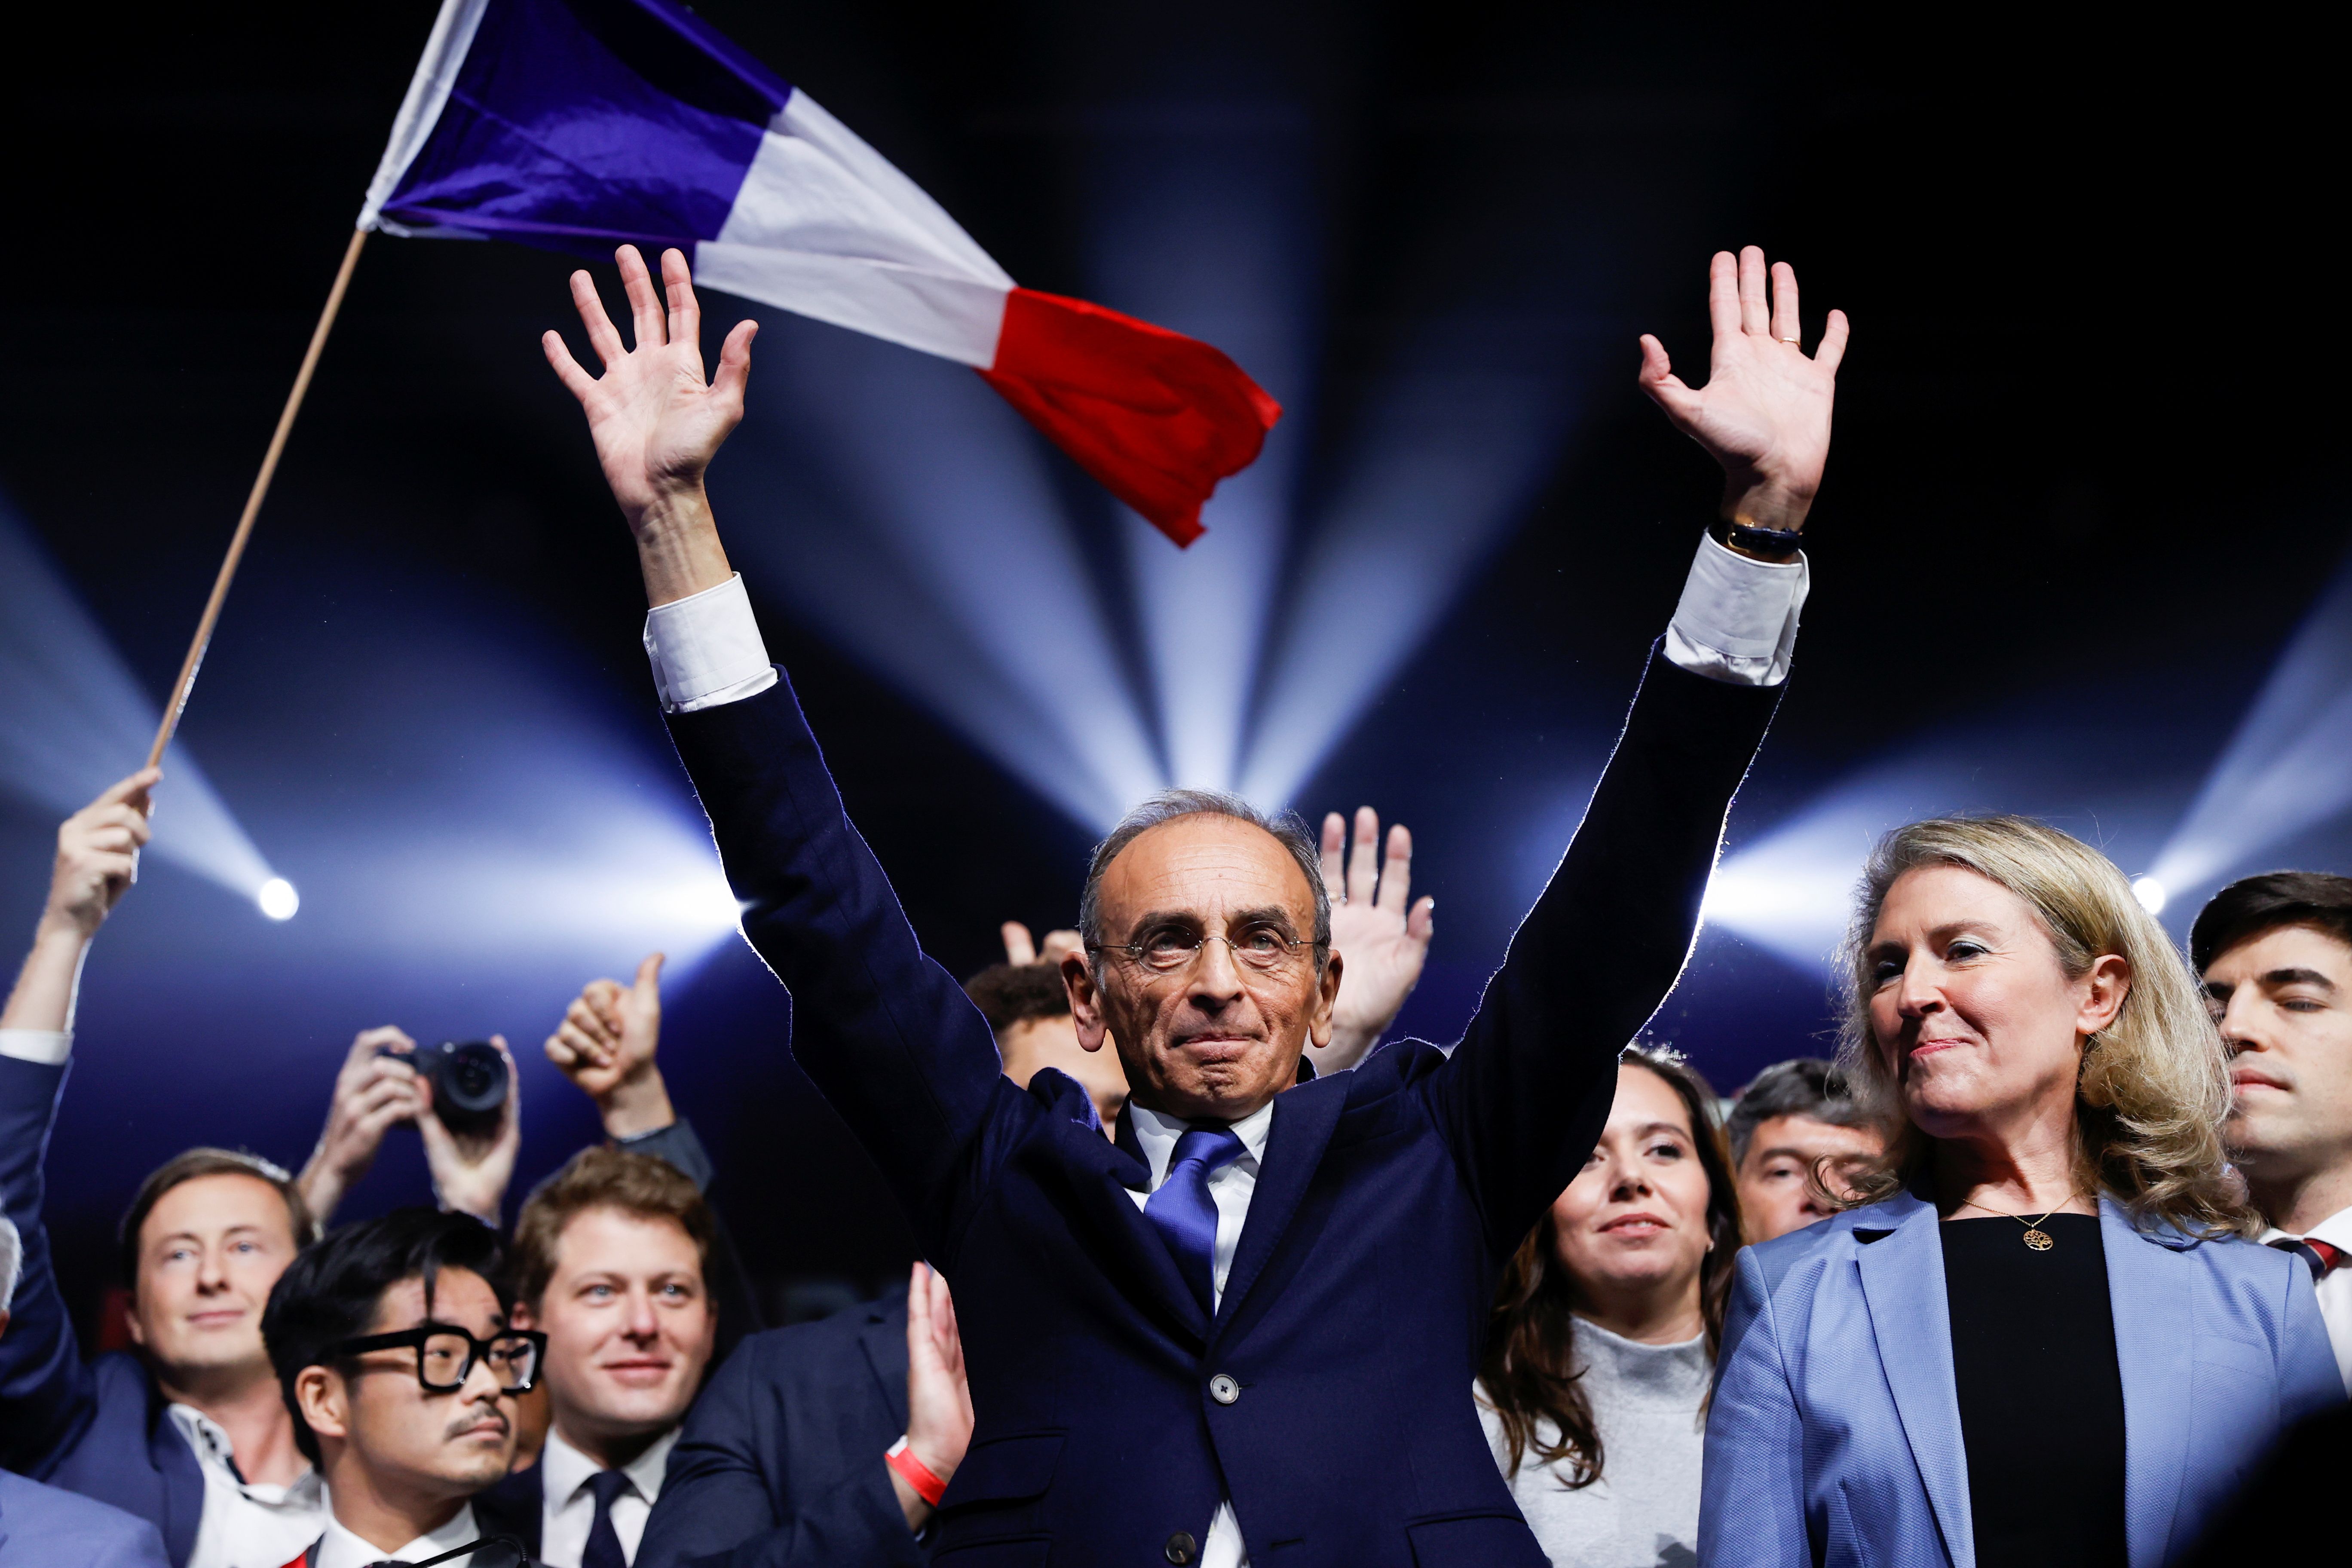 French far-right commentator Eric Zemmour, a candidate in the 2022 French presidential election, attends a political campaign rally in Villepinte near Paris, France, December 5, 2021. REUTERS/Christian Hartmann